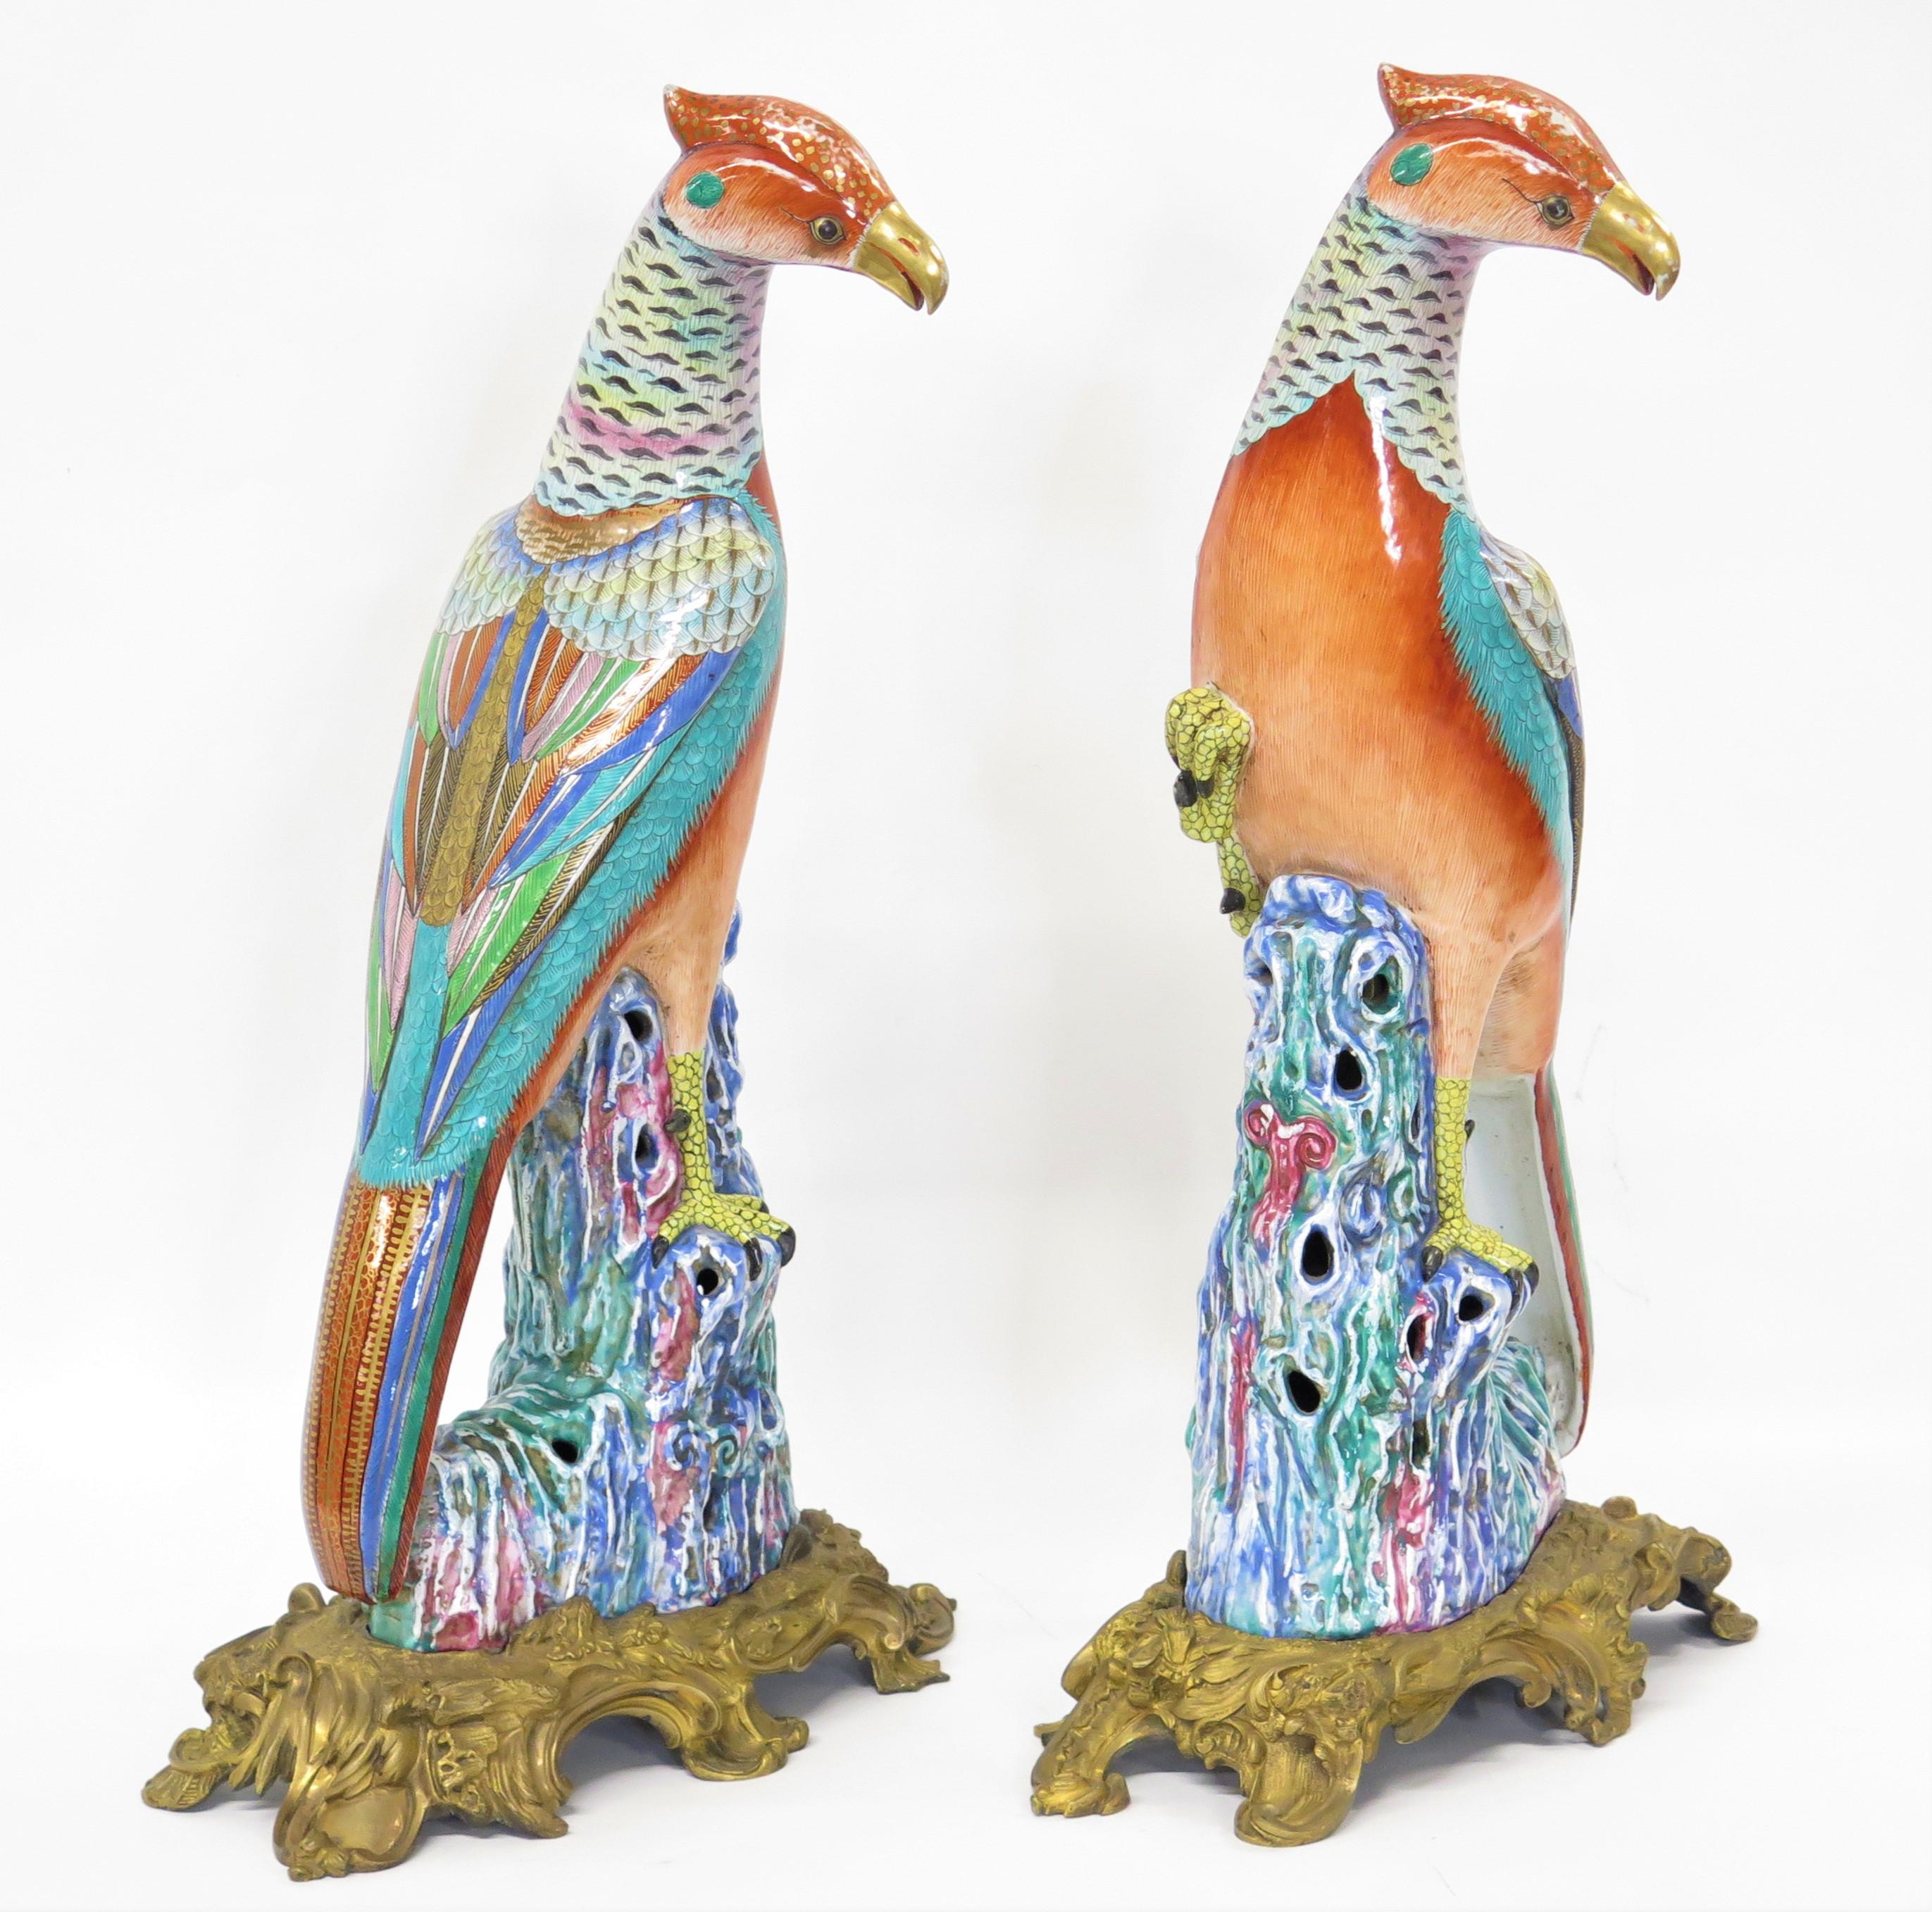 pair of French gilt bronze / ormolu-mounted Chinese Export style porcelain pheasants, splash-glazed rockwork in mirror image, their heads alertly cocked, the plumage on their long necks and folded wings picked out in vibrant Famille Rose enamels,